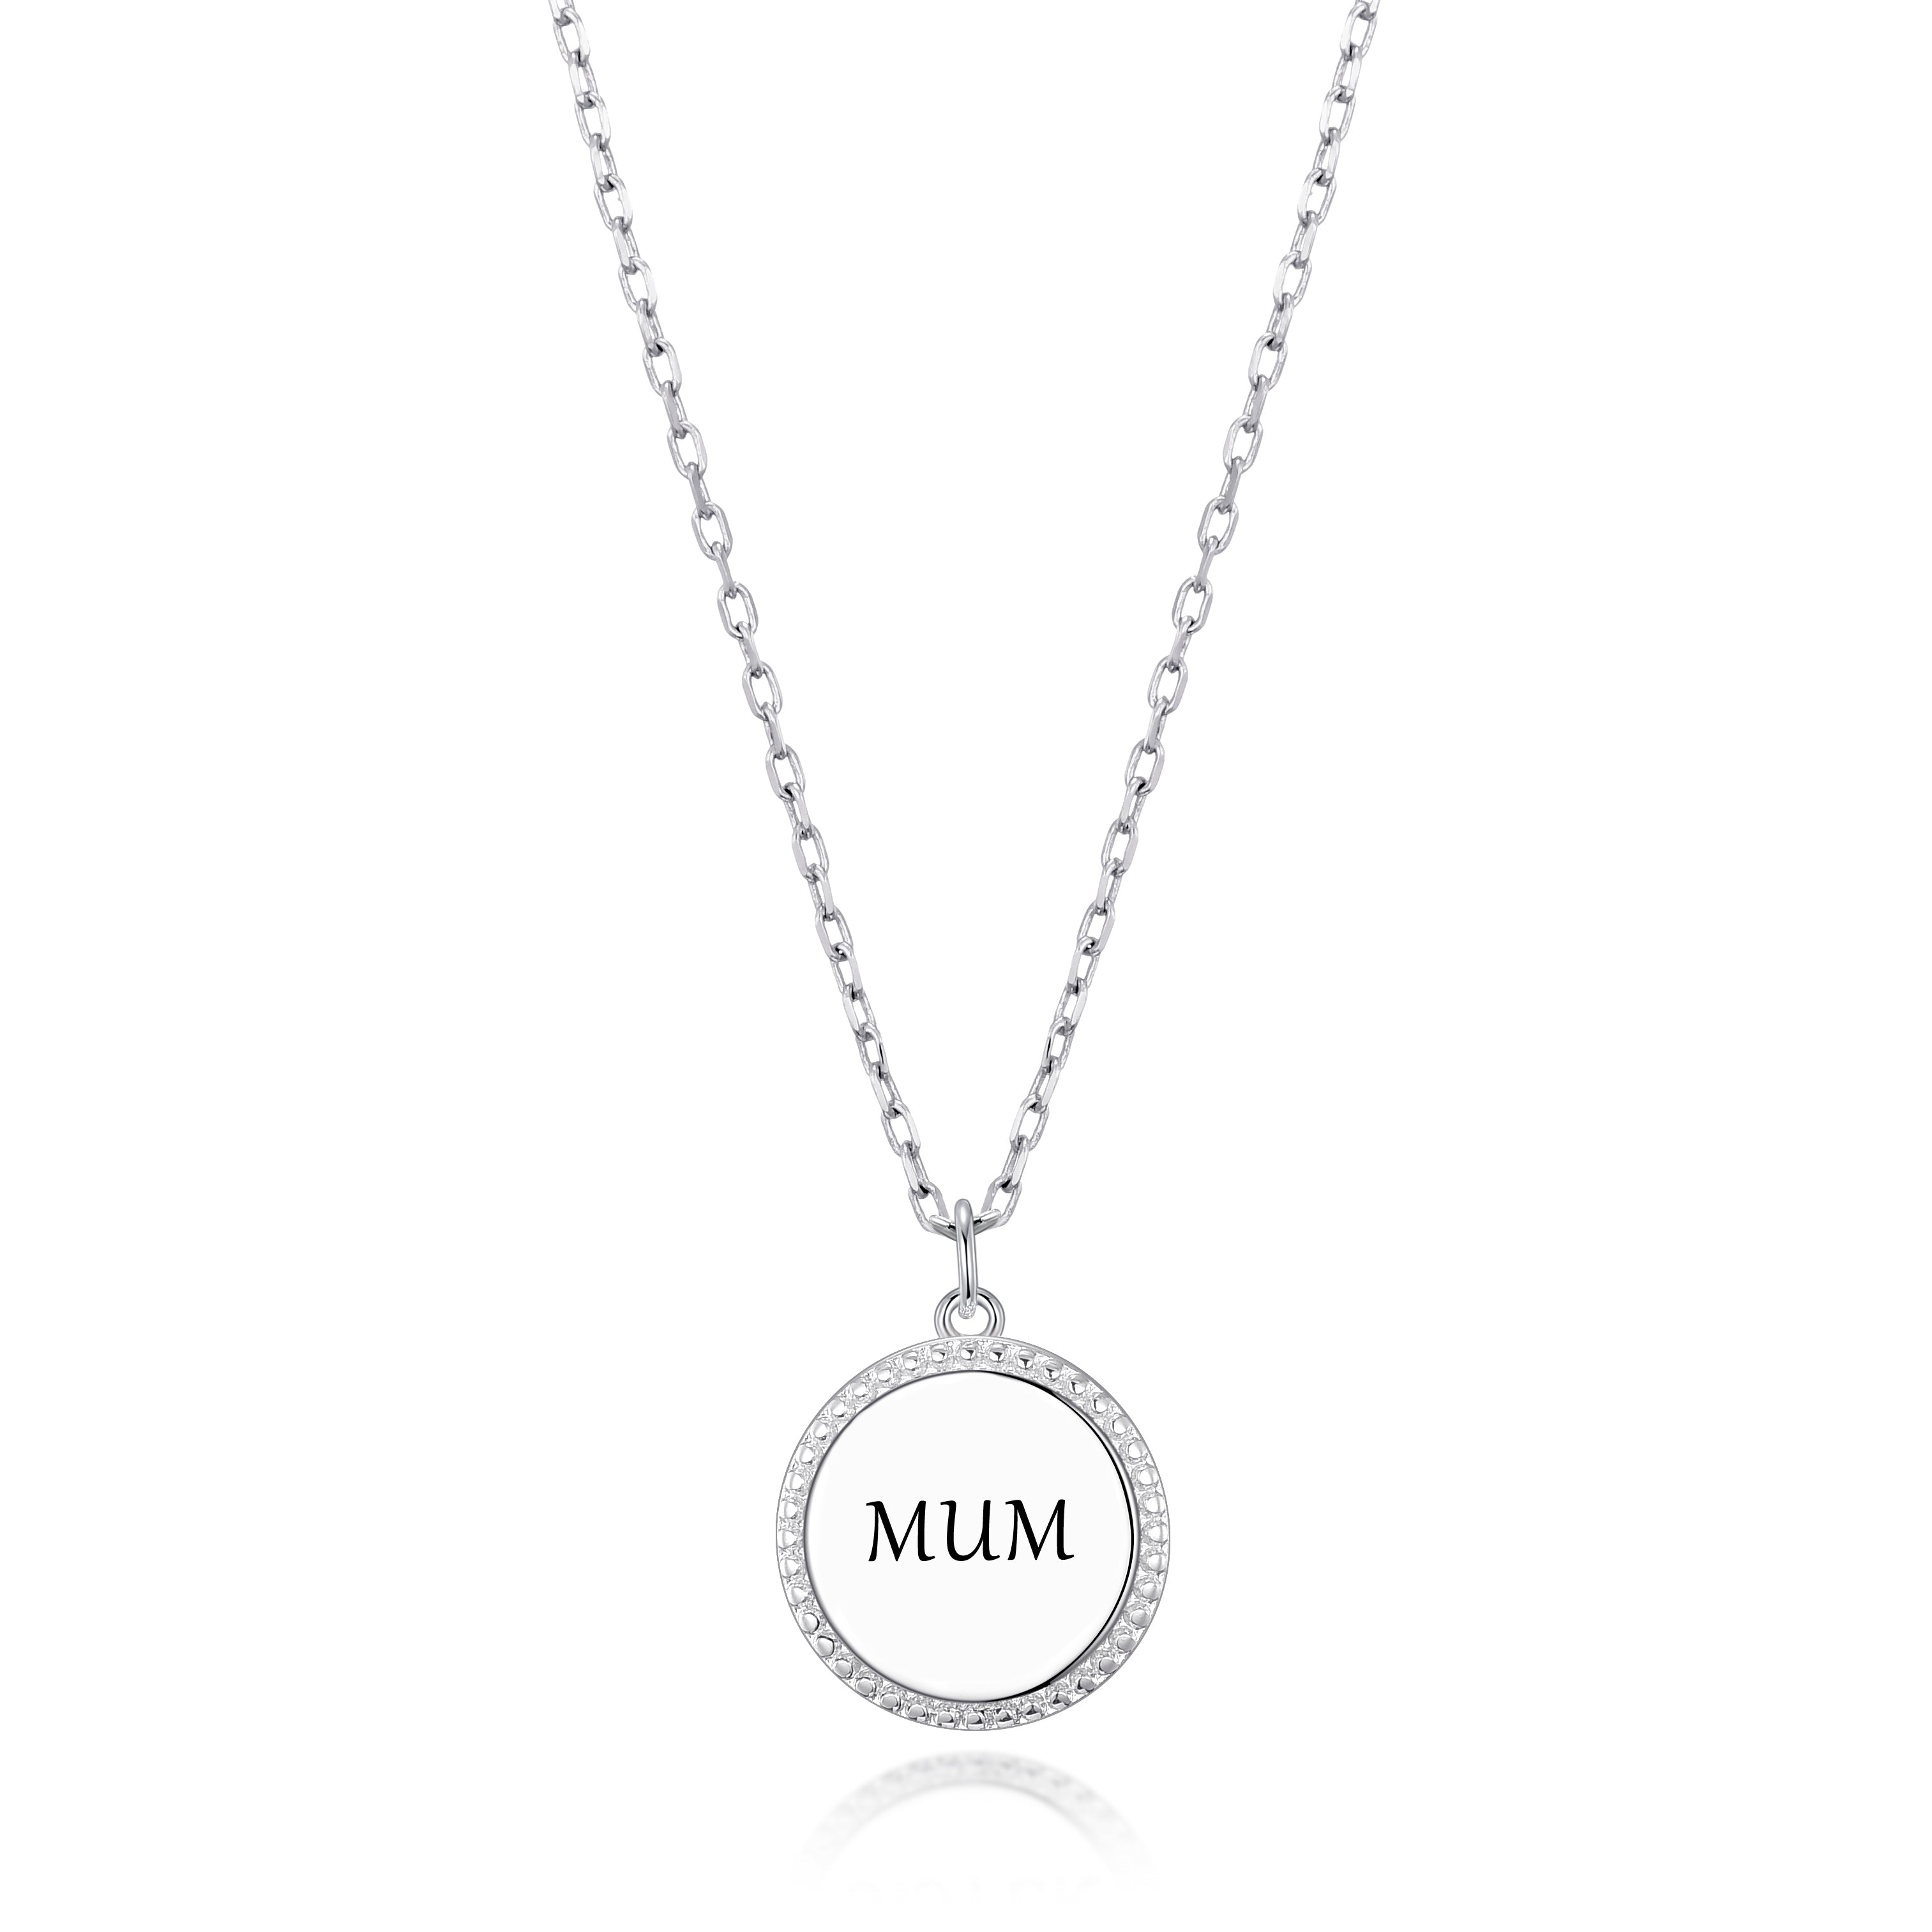 Silver Plated Filigree Disc Mum Necklace